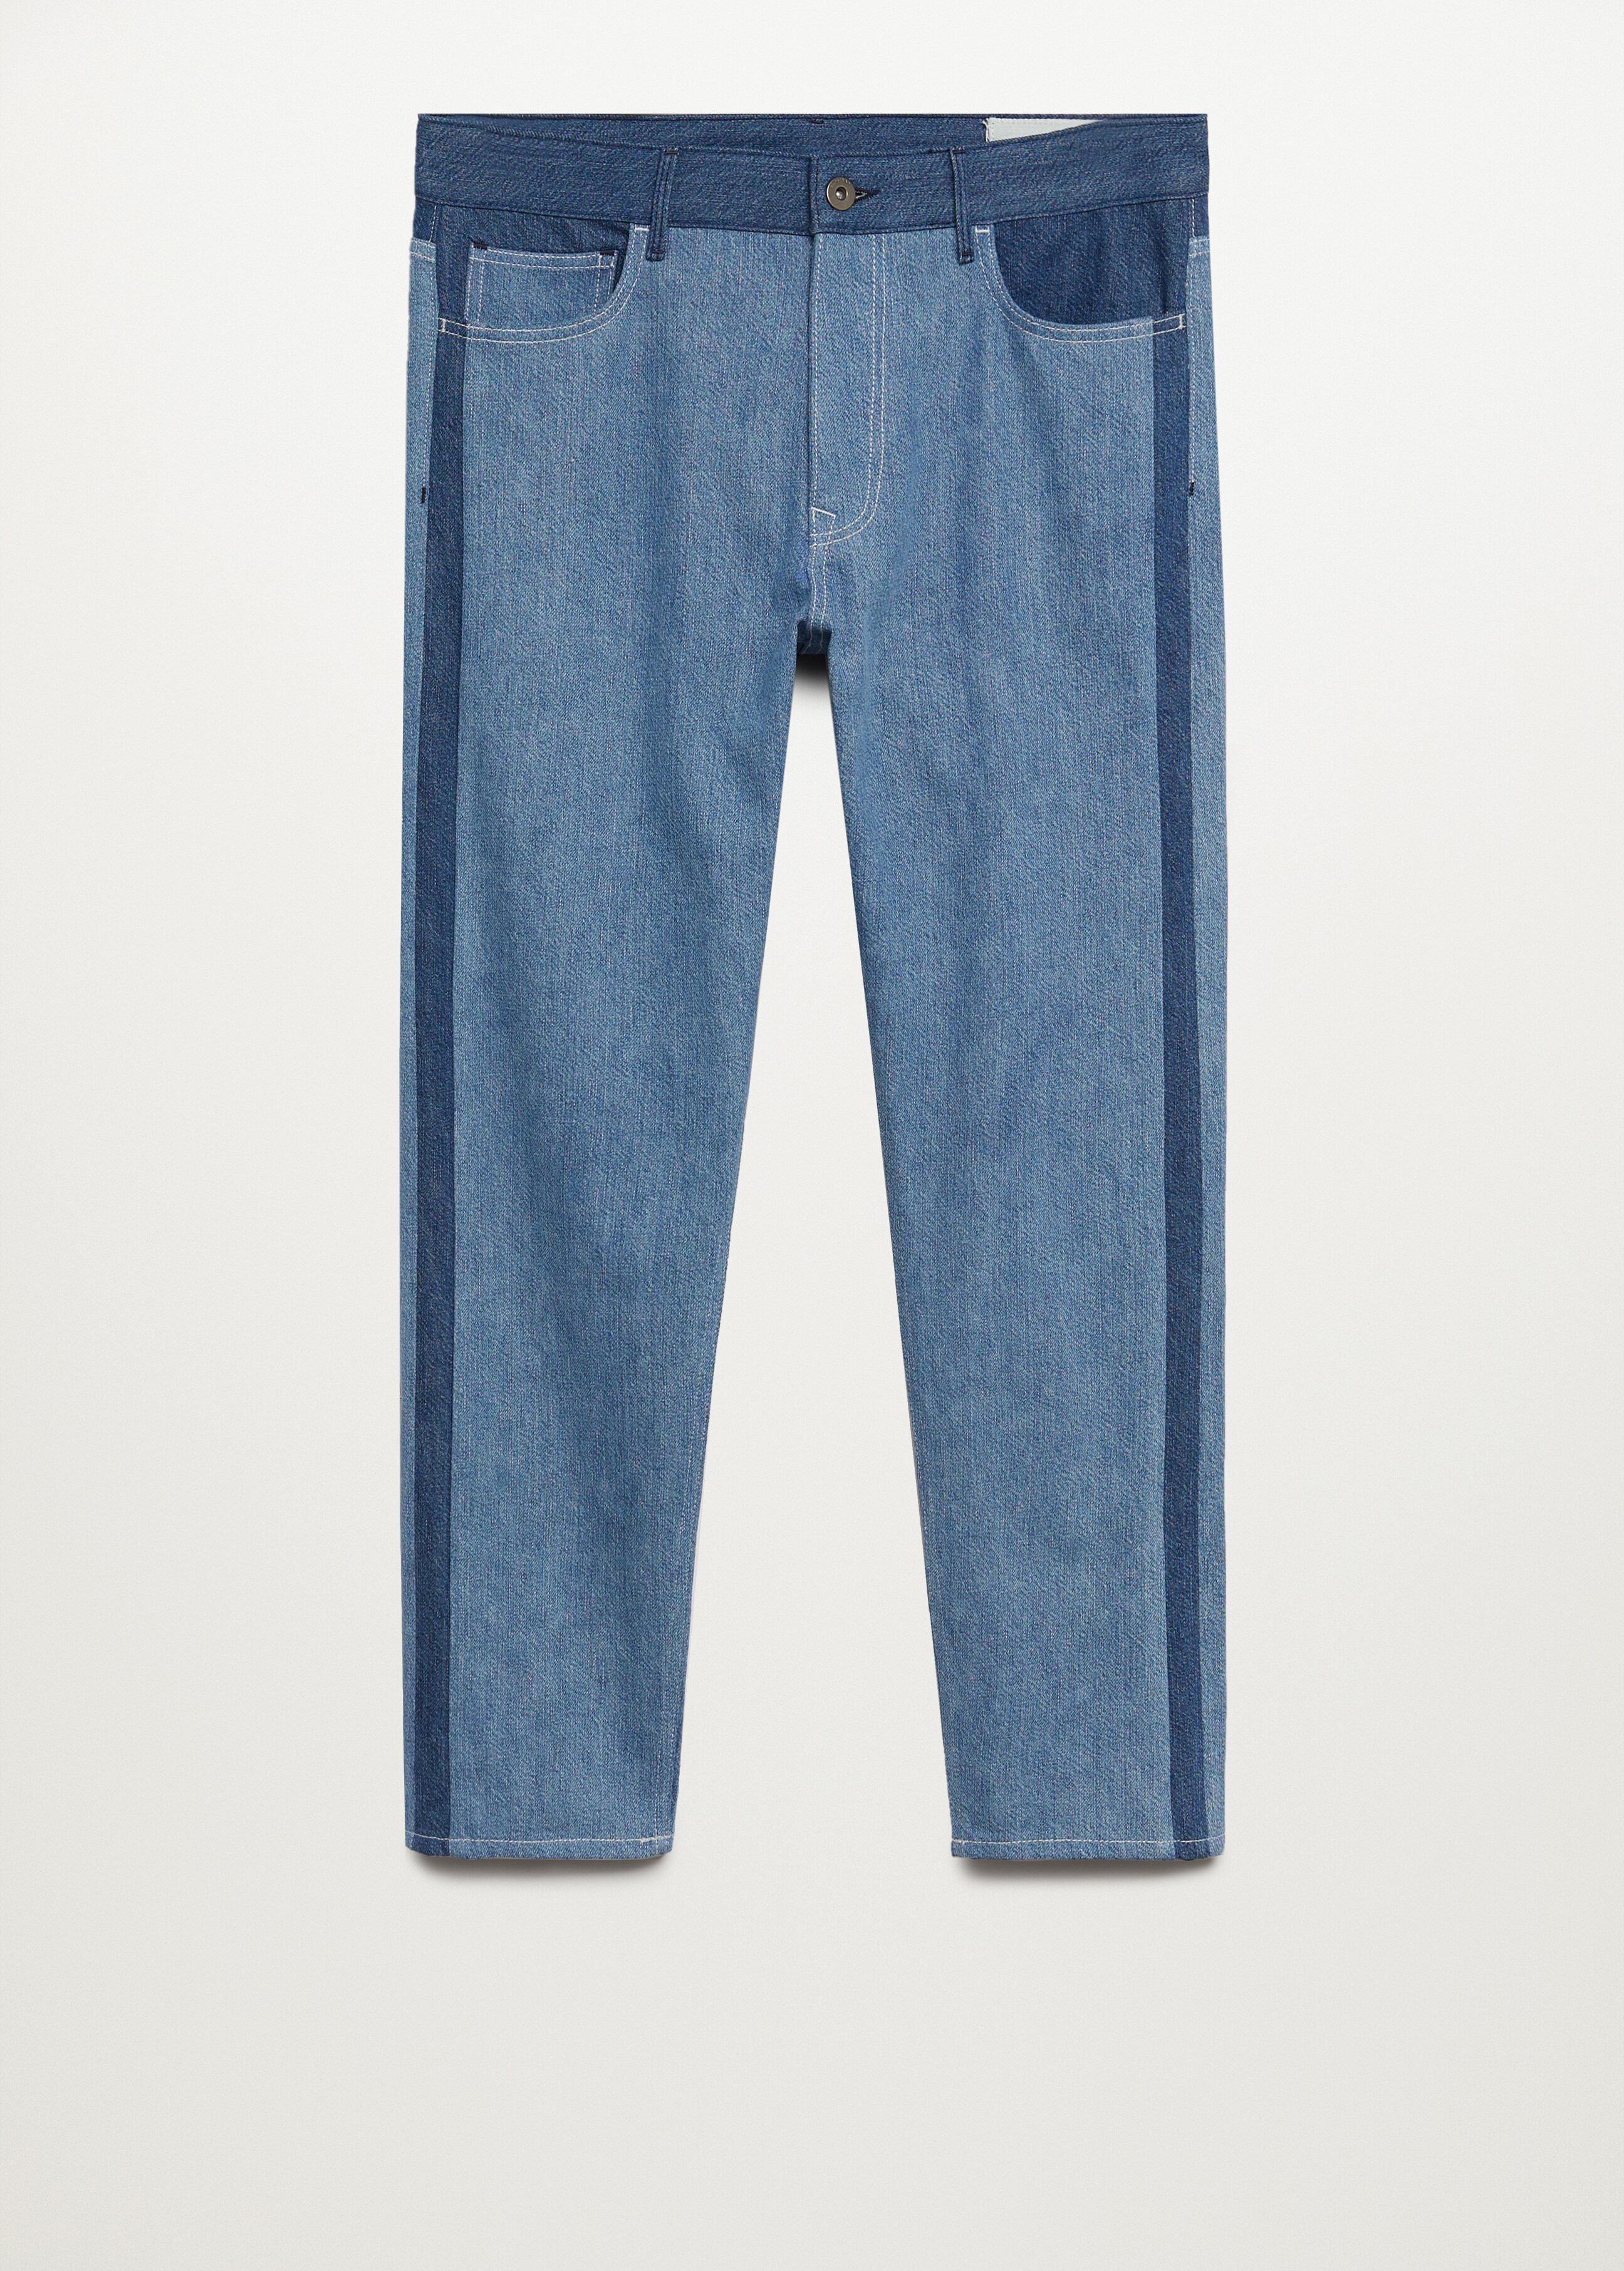 Tapered cropped vintage jeans - Article without model